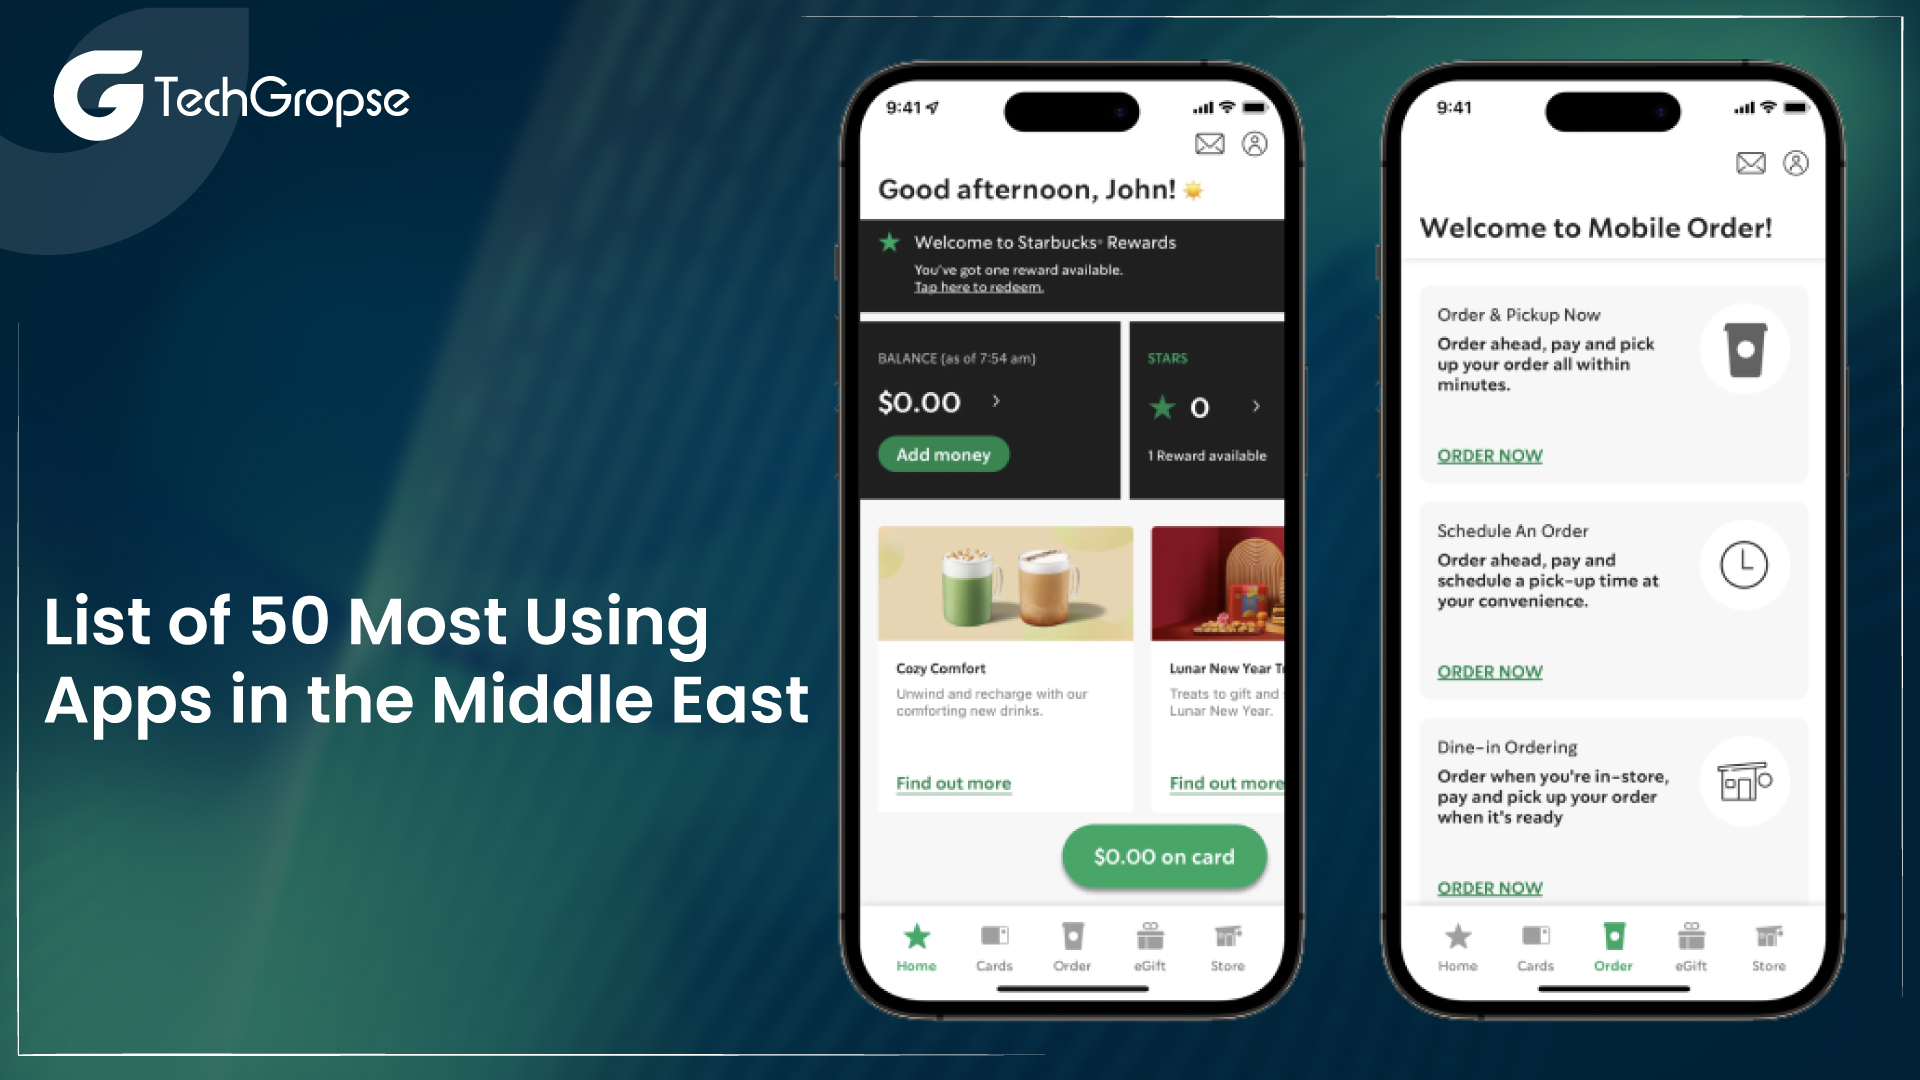 List of 50 Most Using Apps in the Middle East